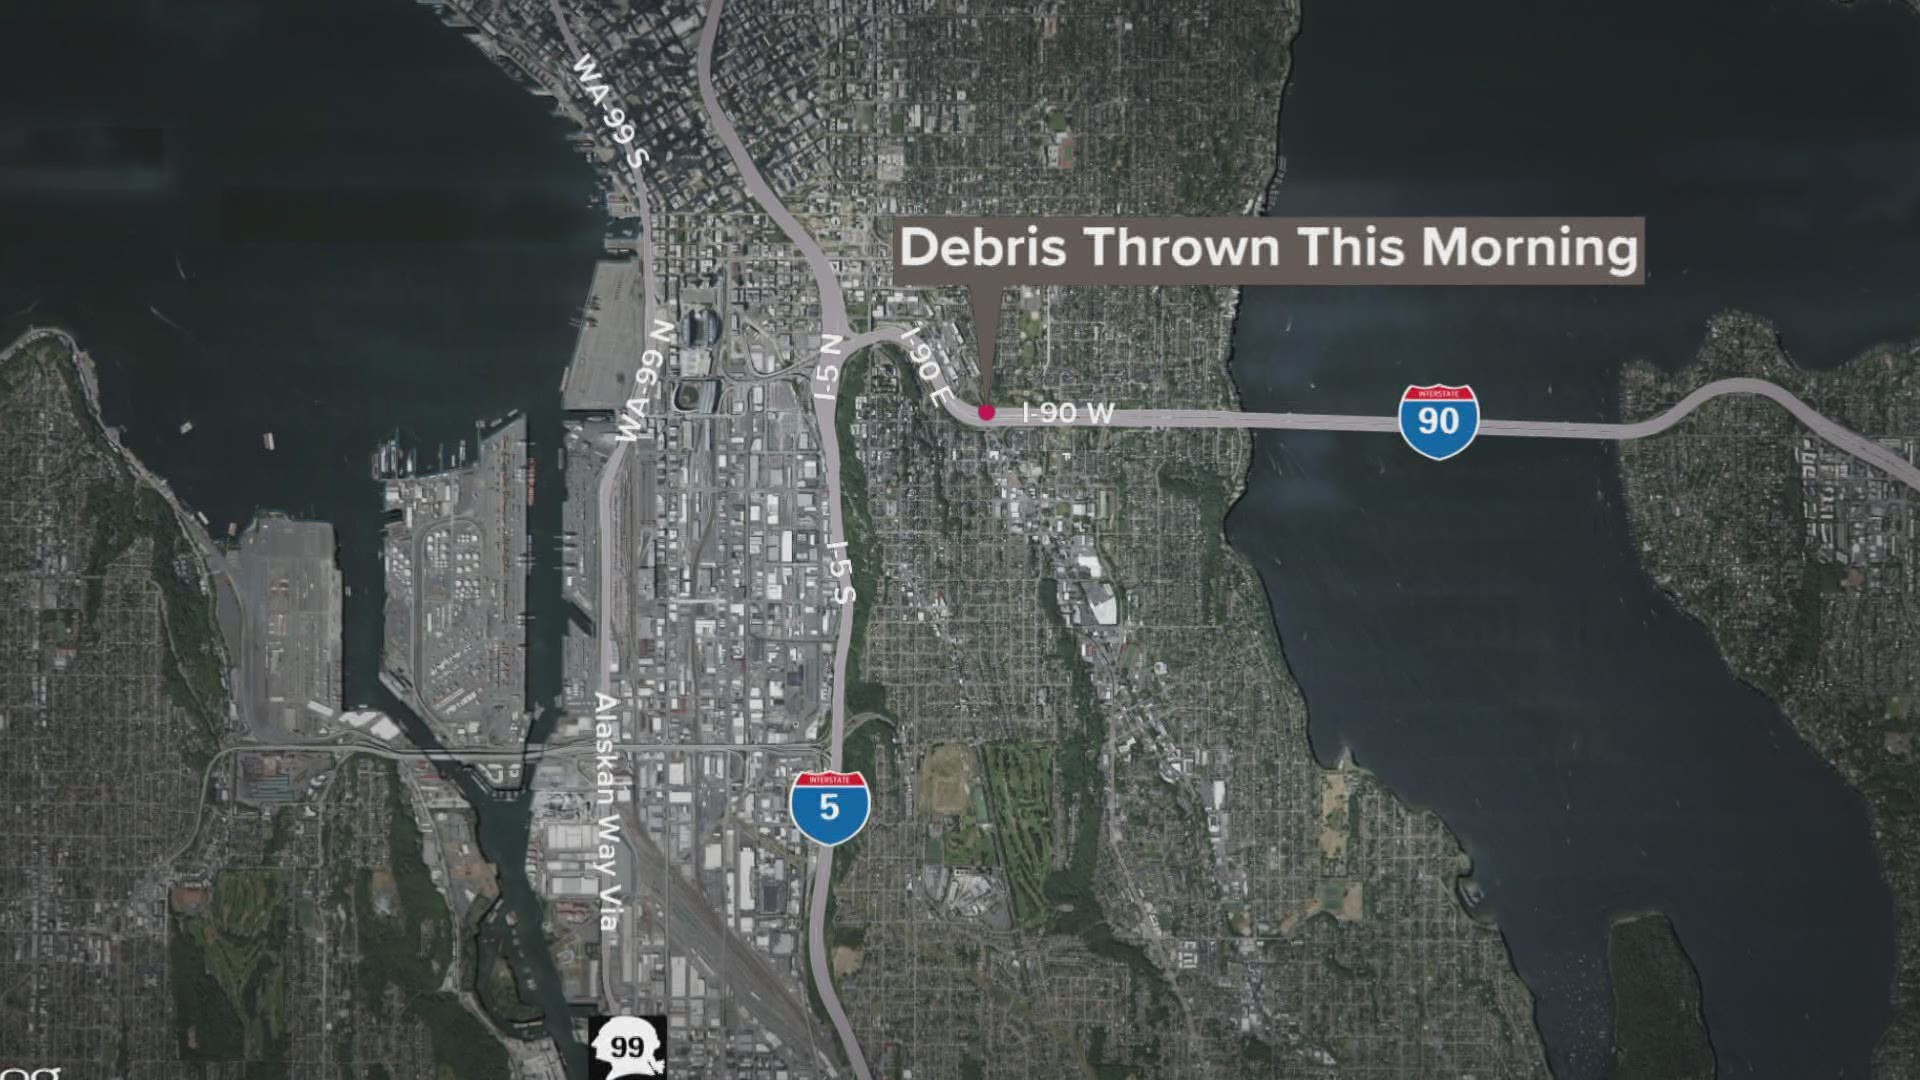 The suspect was arrested Friday, July 10. The Washington State Patrol responded to two more incidents of debris throwing Monday morning.